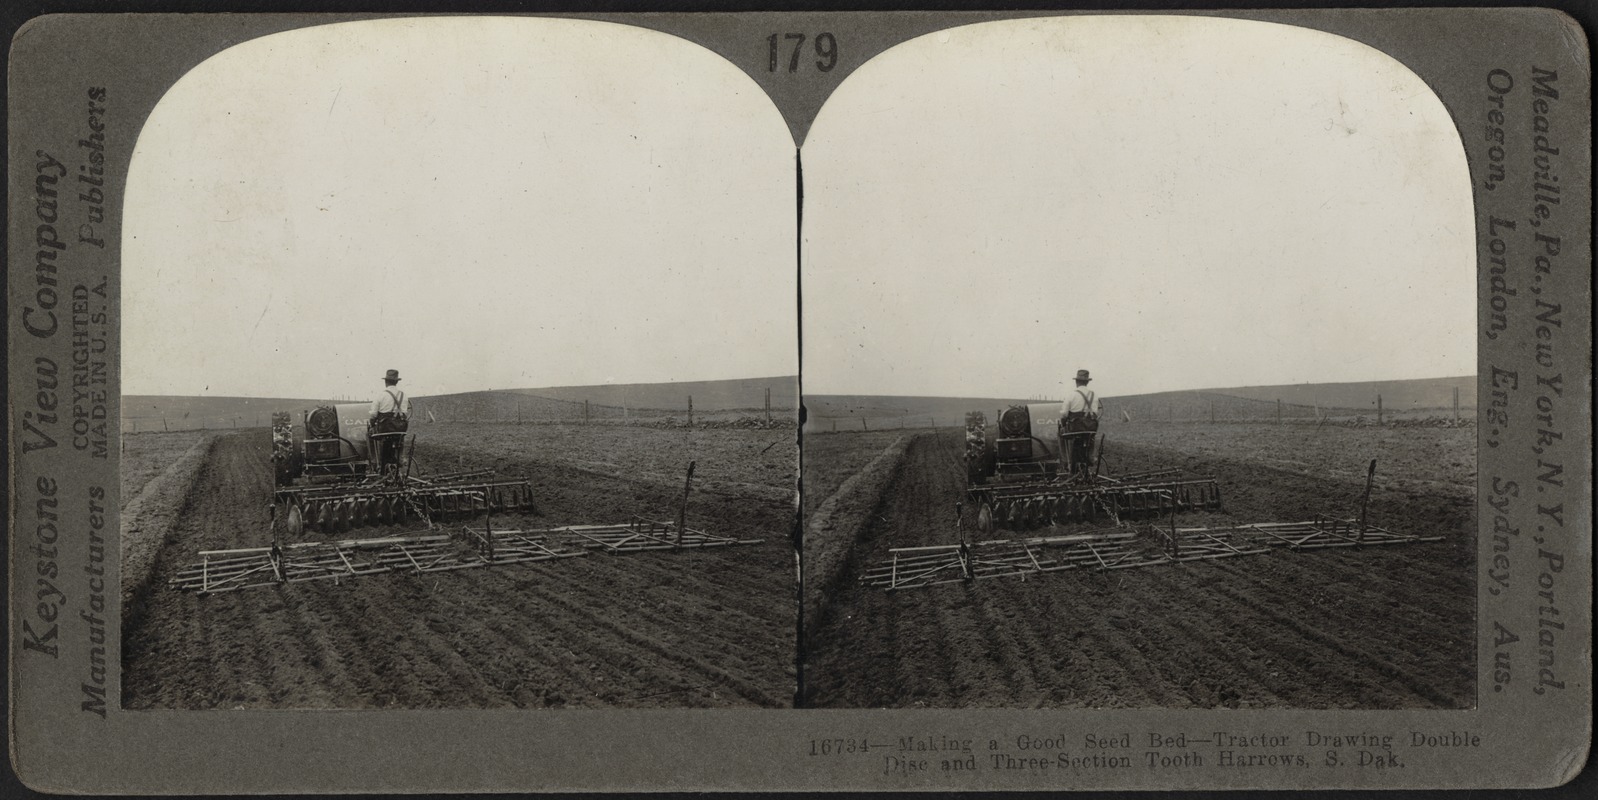 Preparing a seed bed with modern machinery, S. Dak.